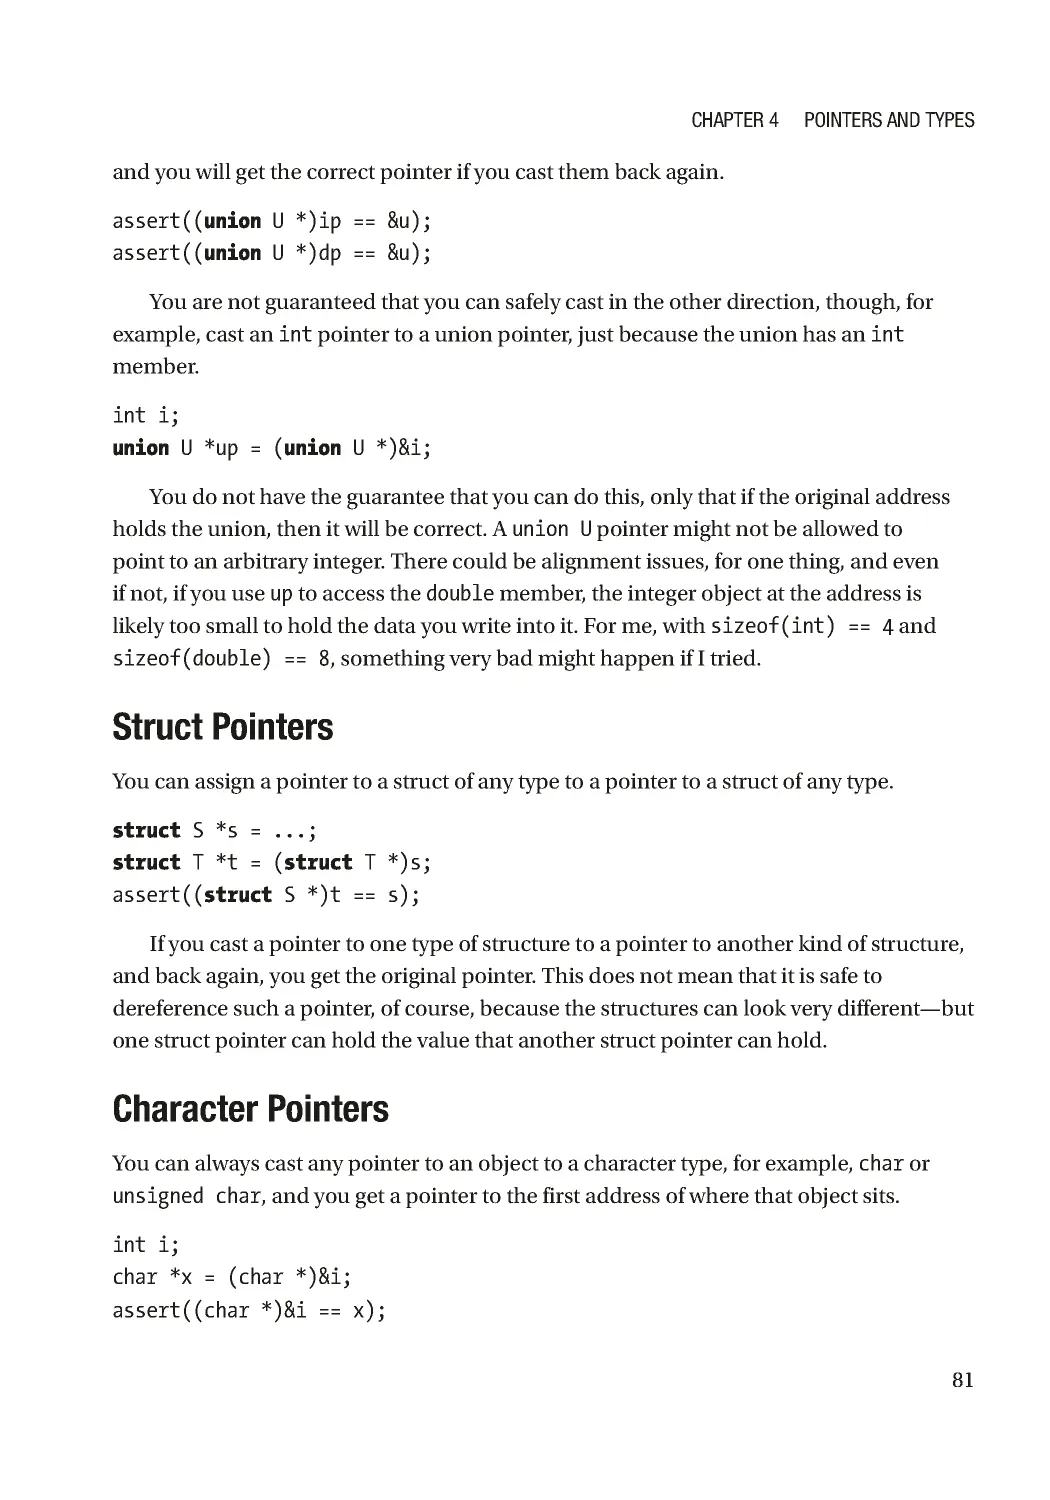 Struct Pointers
Character Pointers